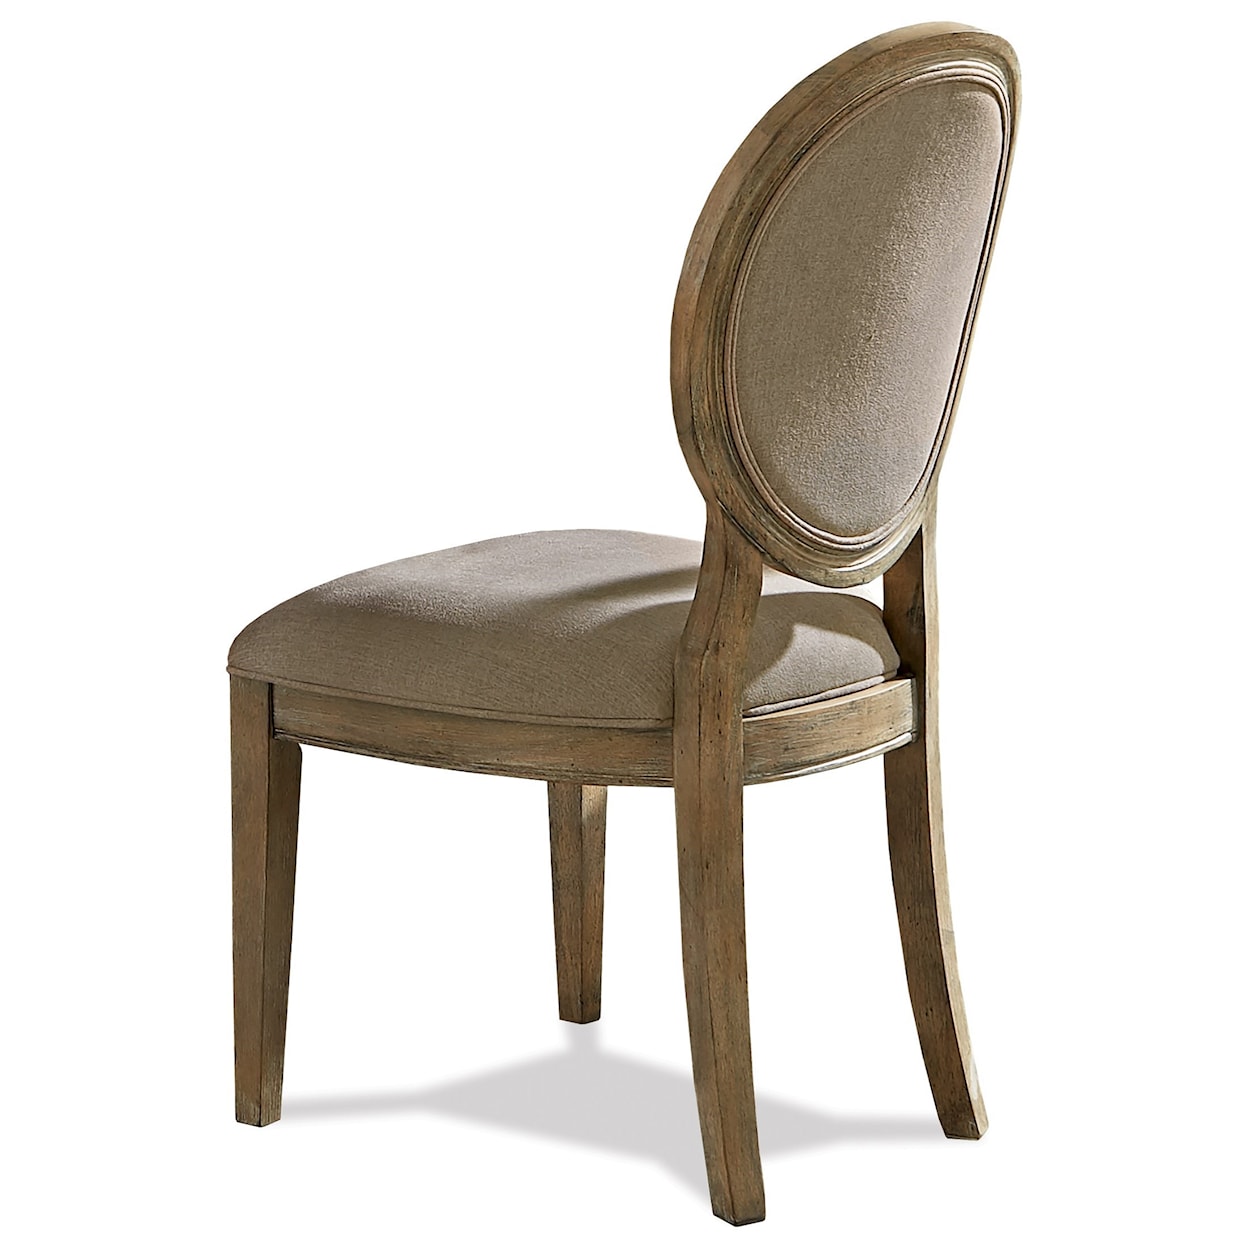 Riverside Furniture Mix and Match Upholstered Oval Side Chair